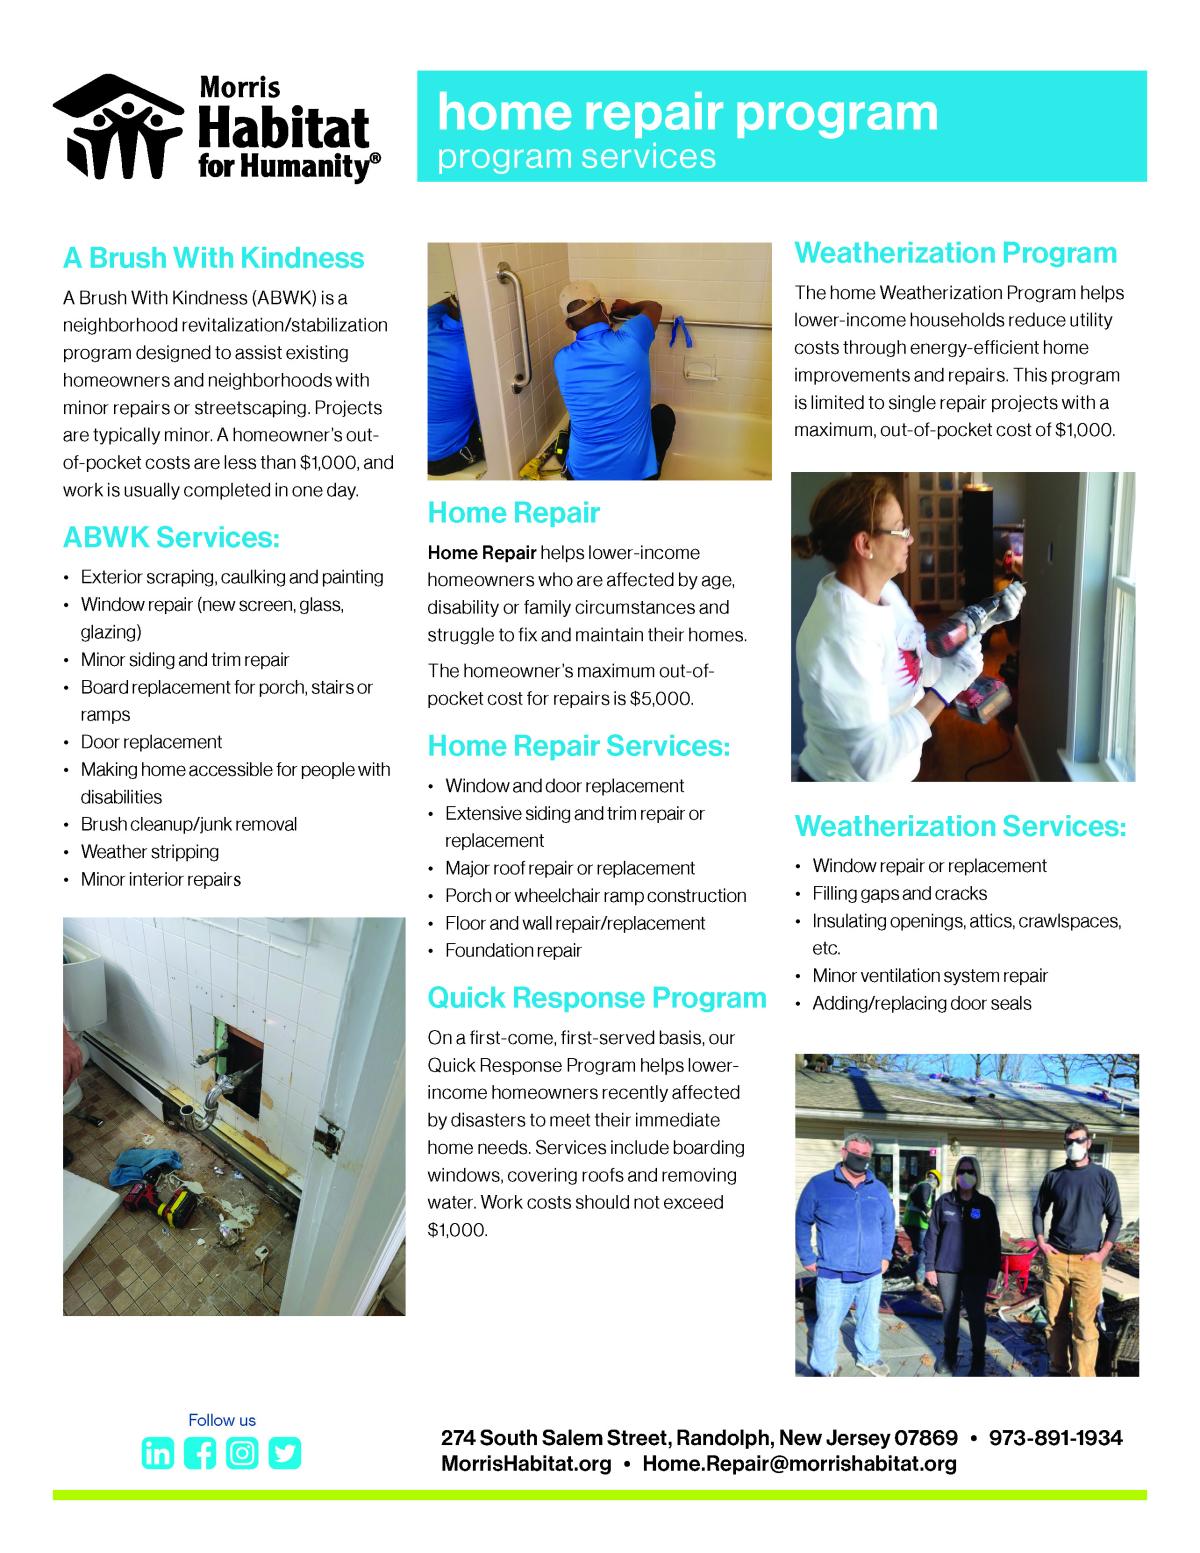 Morris Habitat for Humanity Page 4